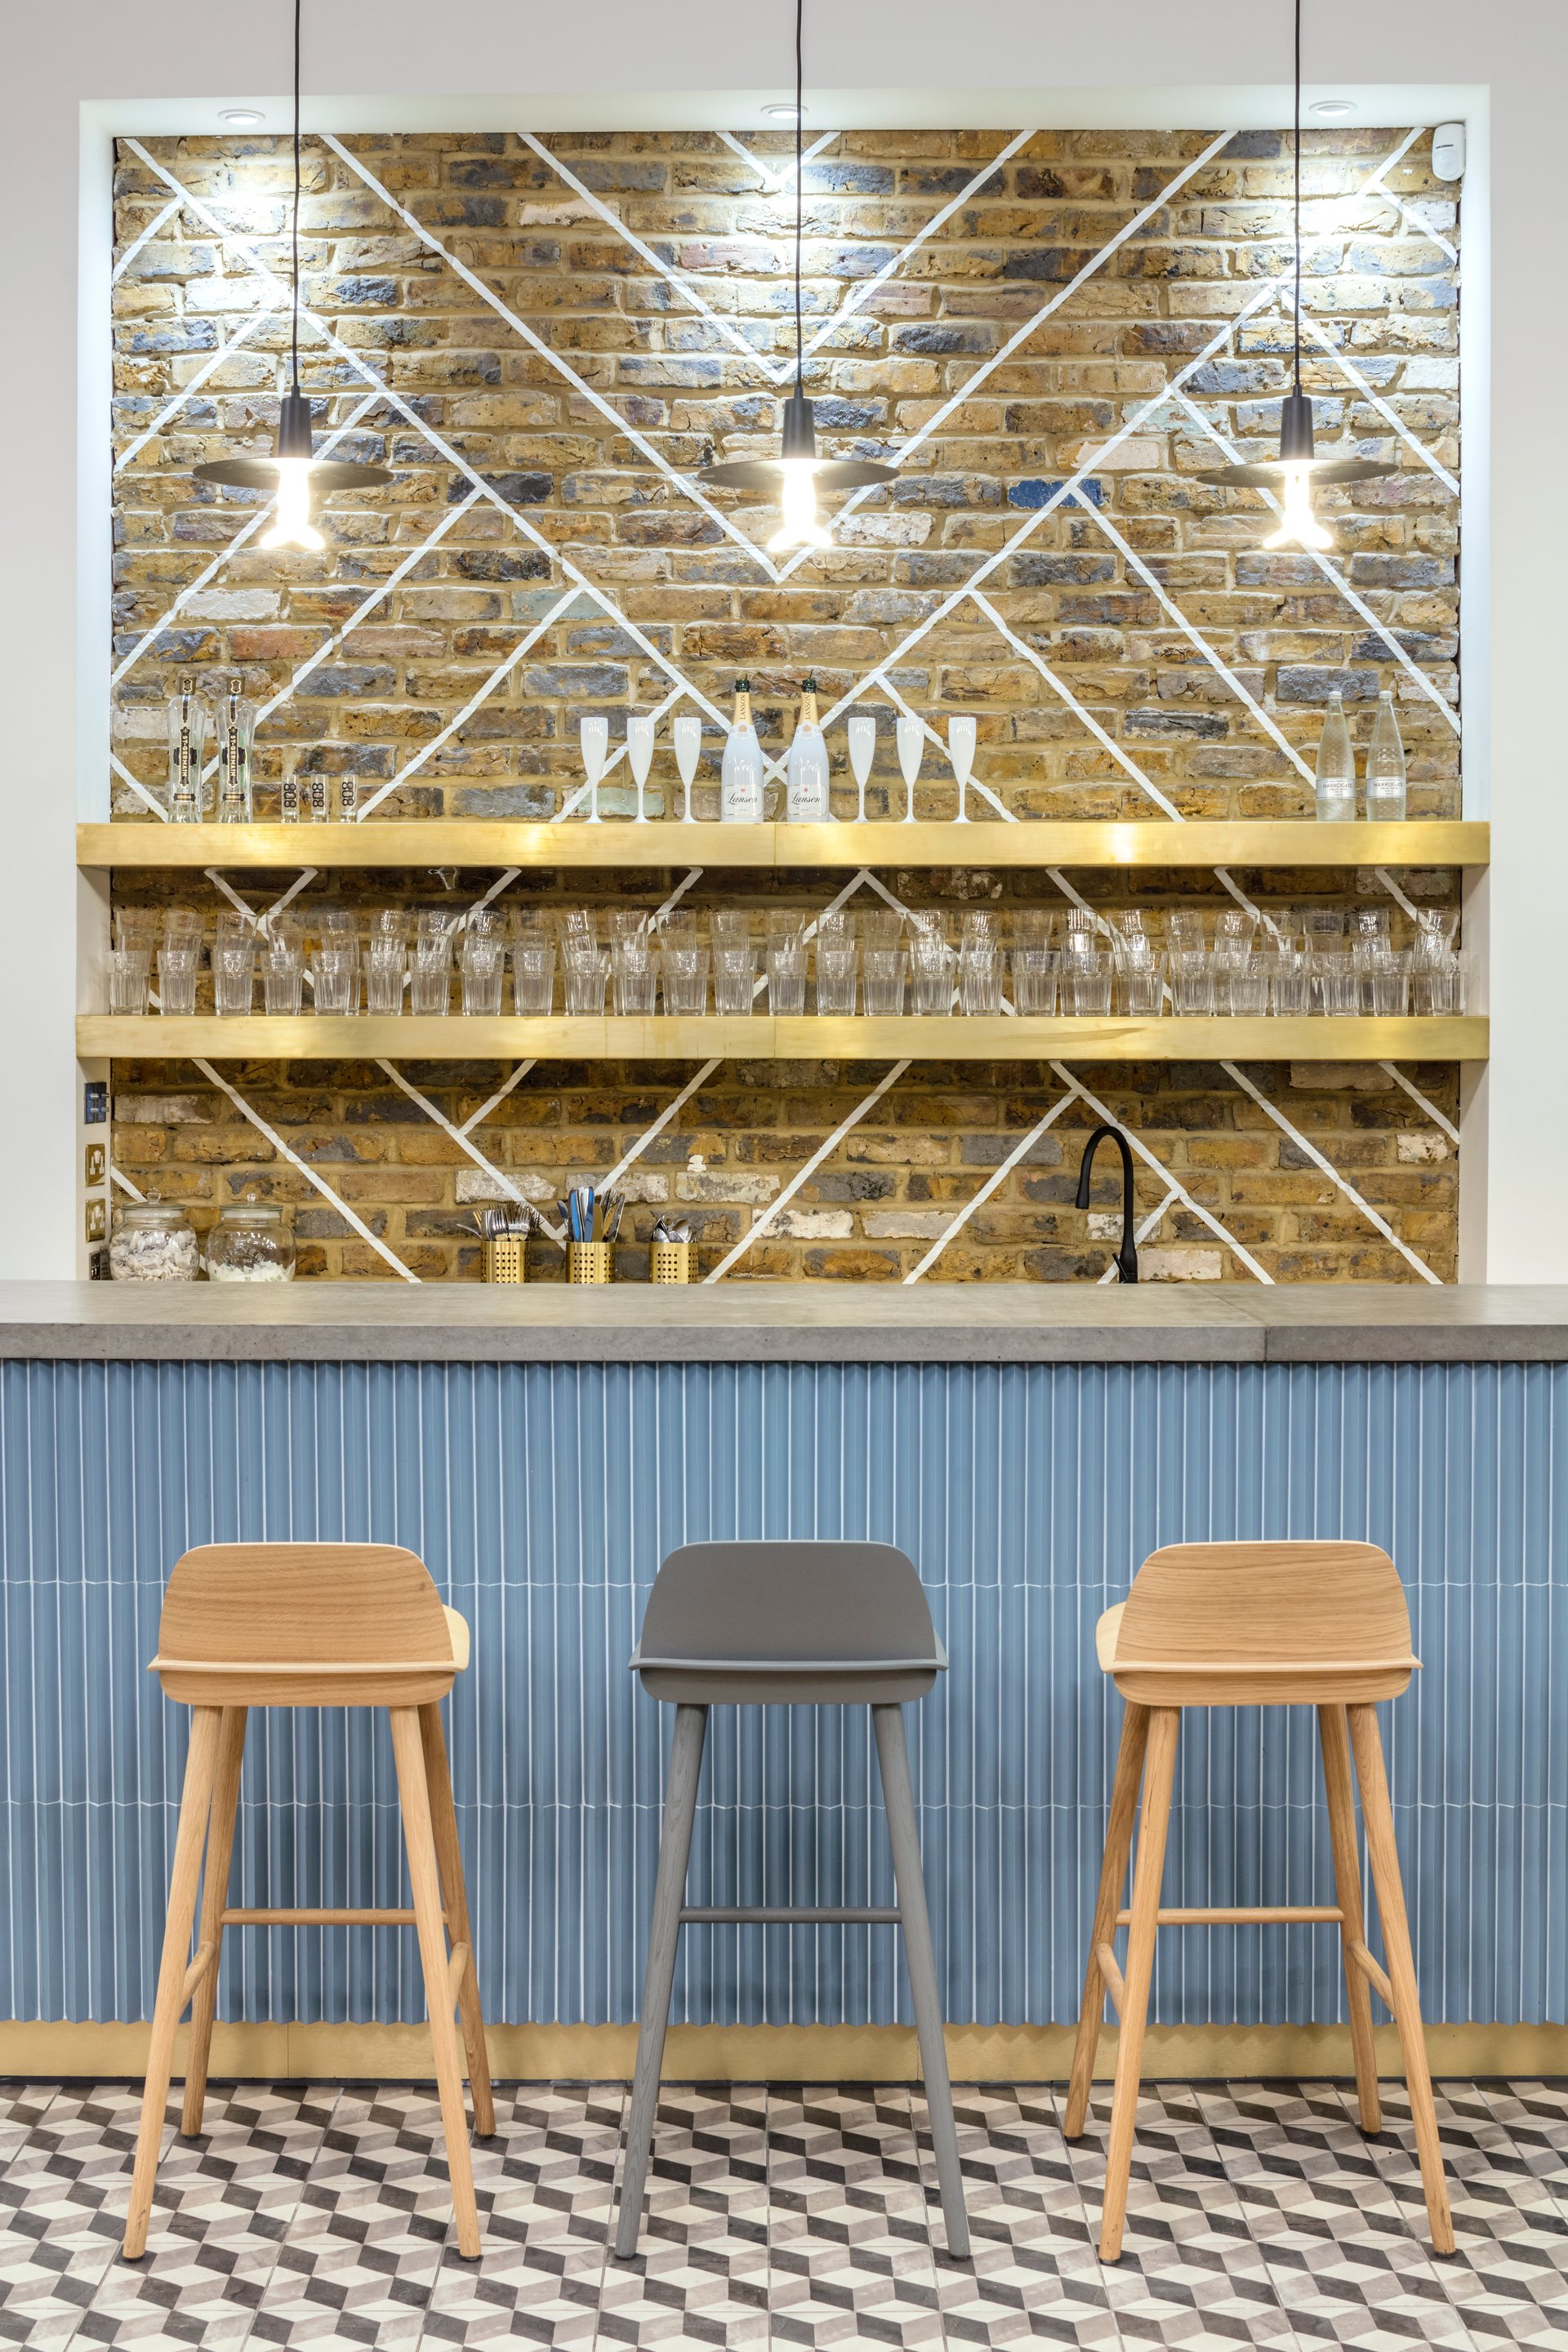 Interior of Boutique Workplace- Clerkenwell Road